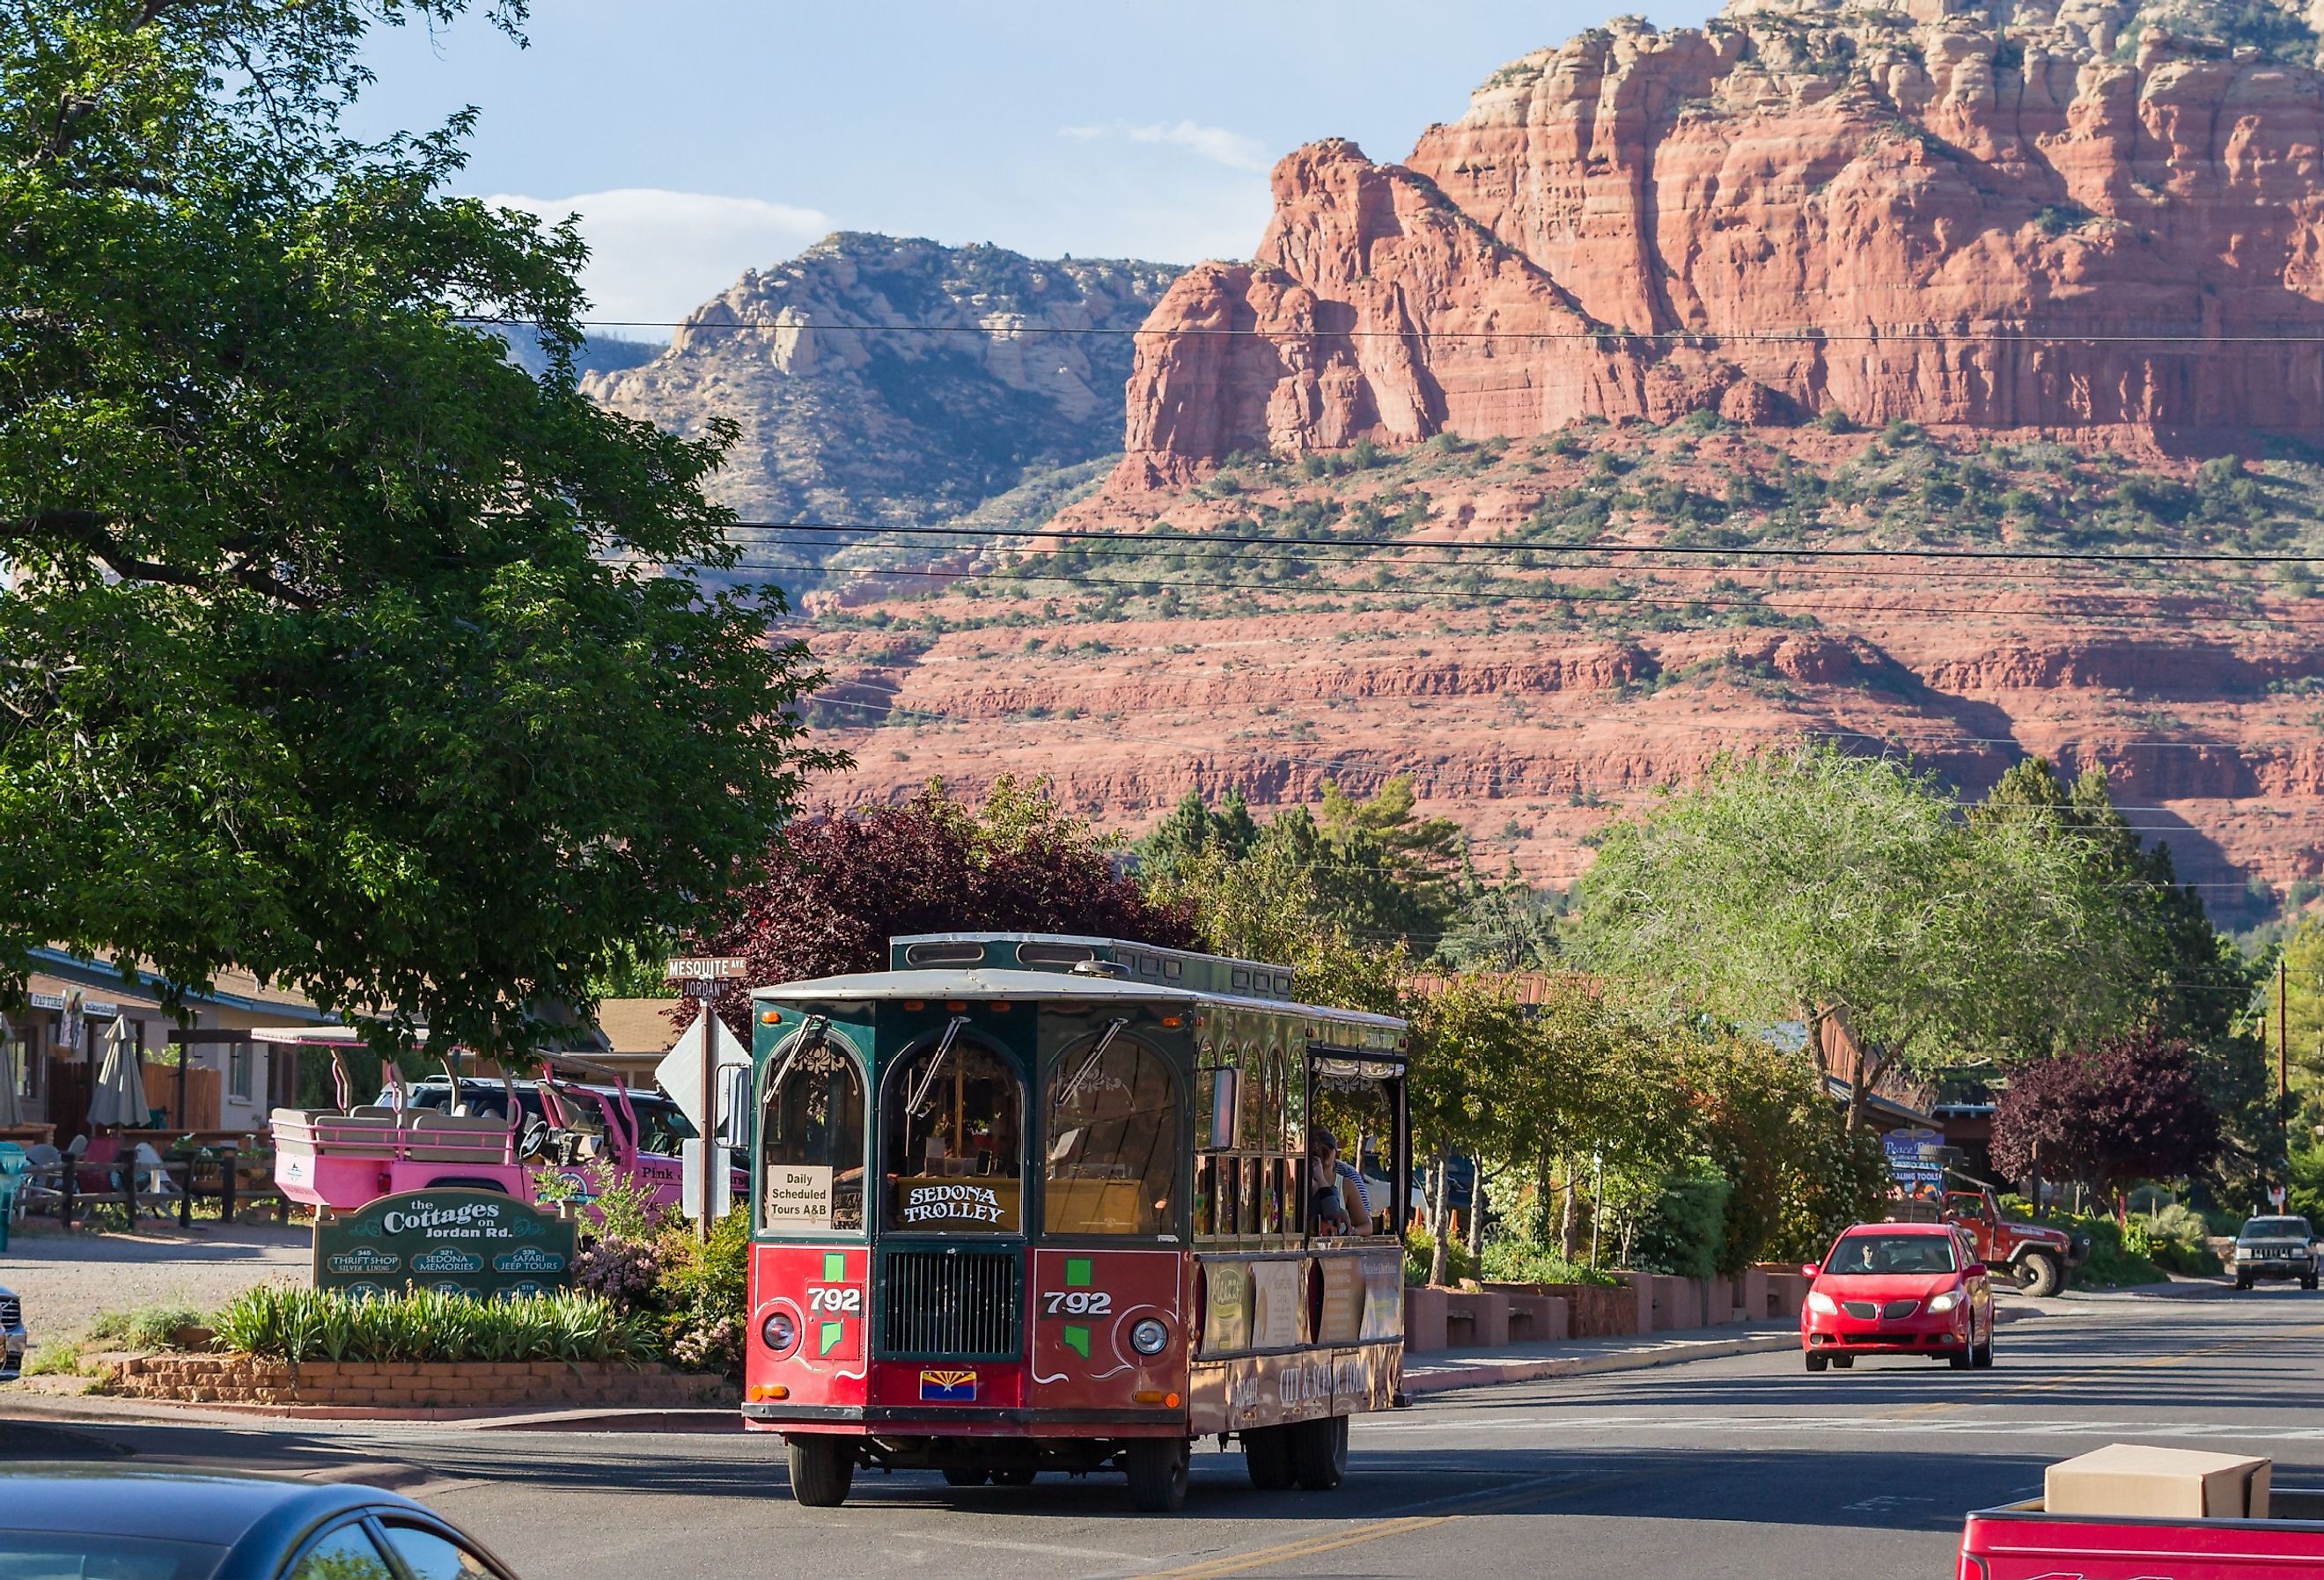 Sedona Trolley giving a tour of Sedona, Arizona and scenery, in spring. Image credit Wollertz via Shutterstock